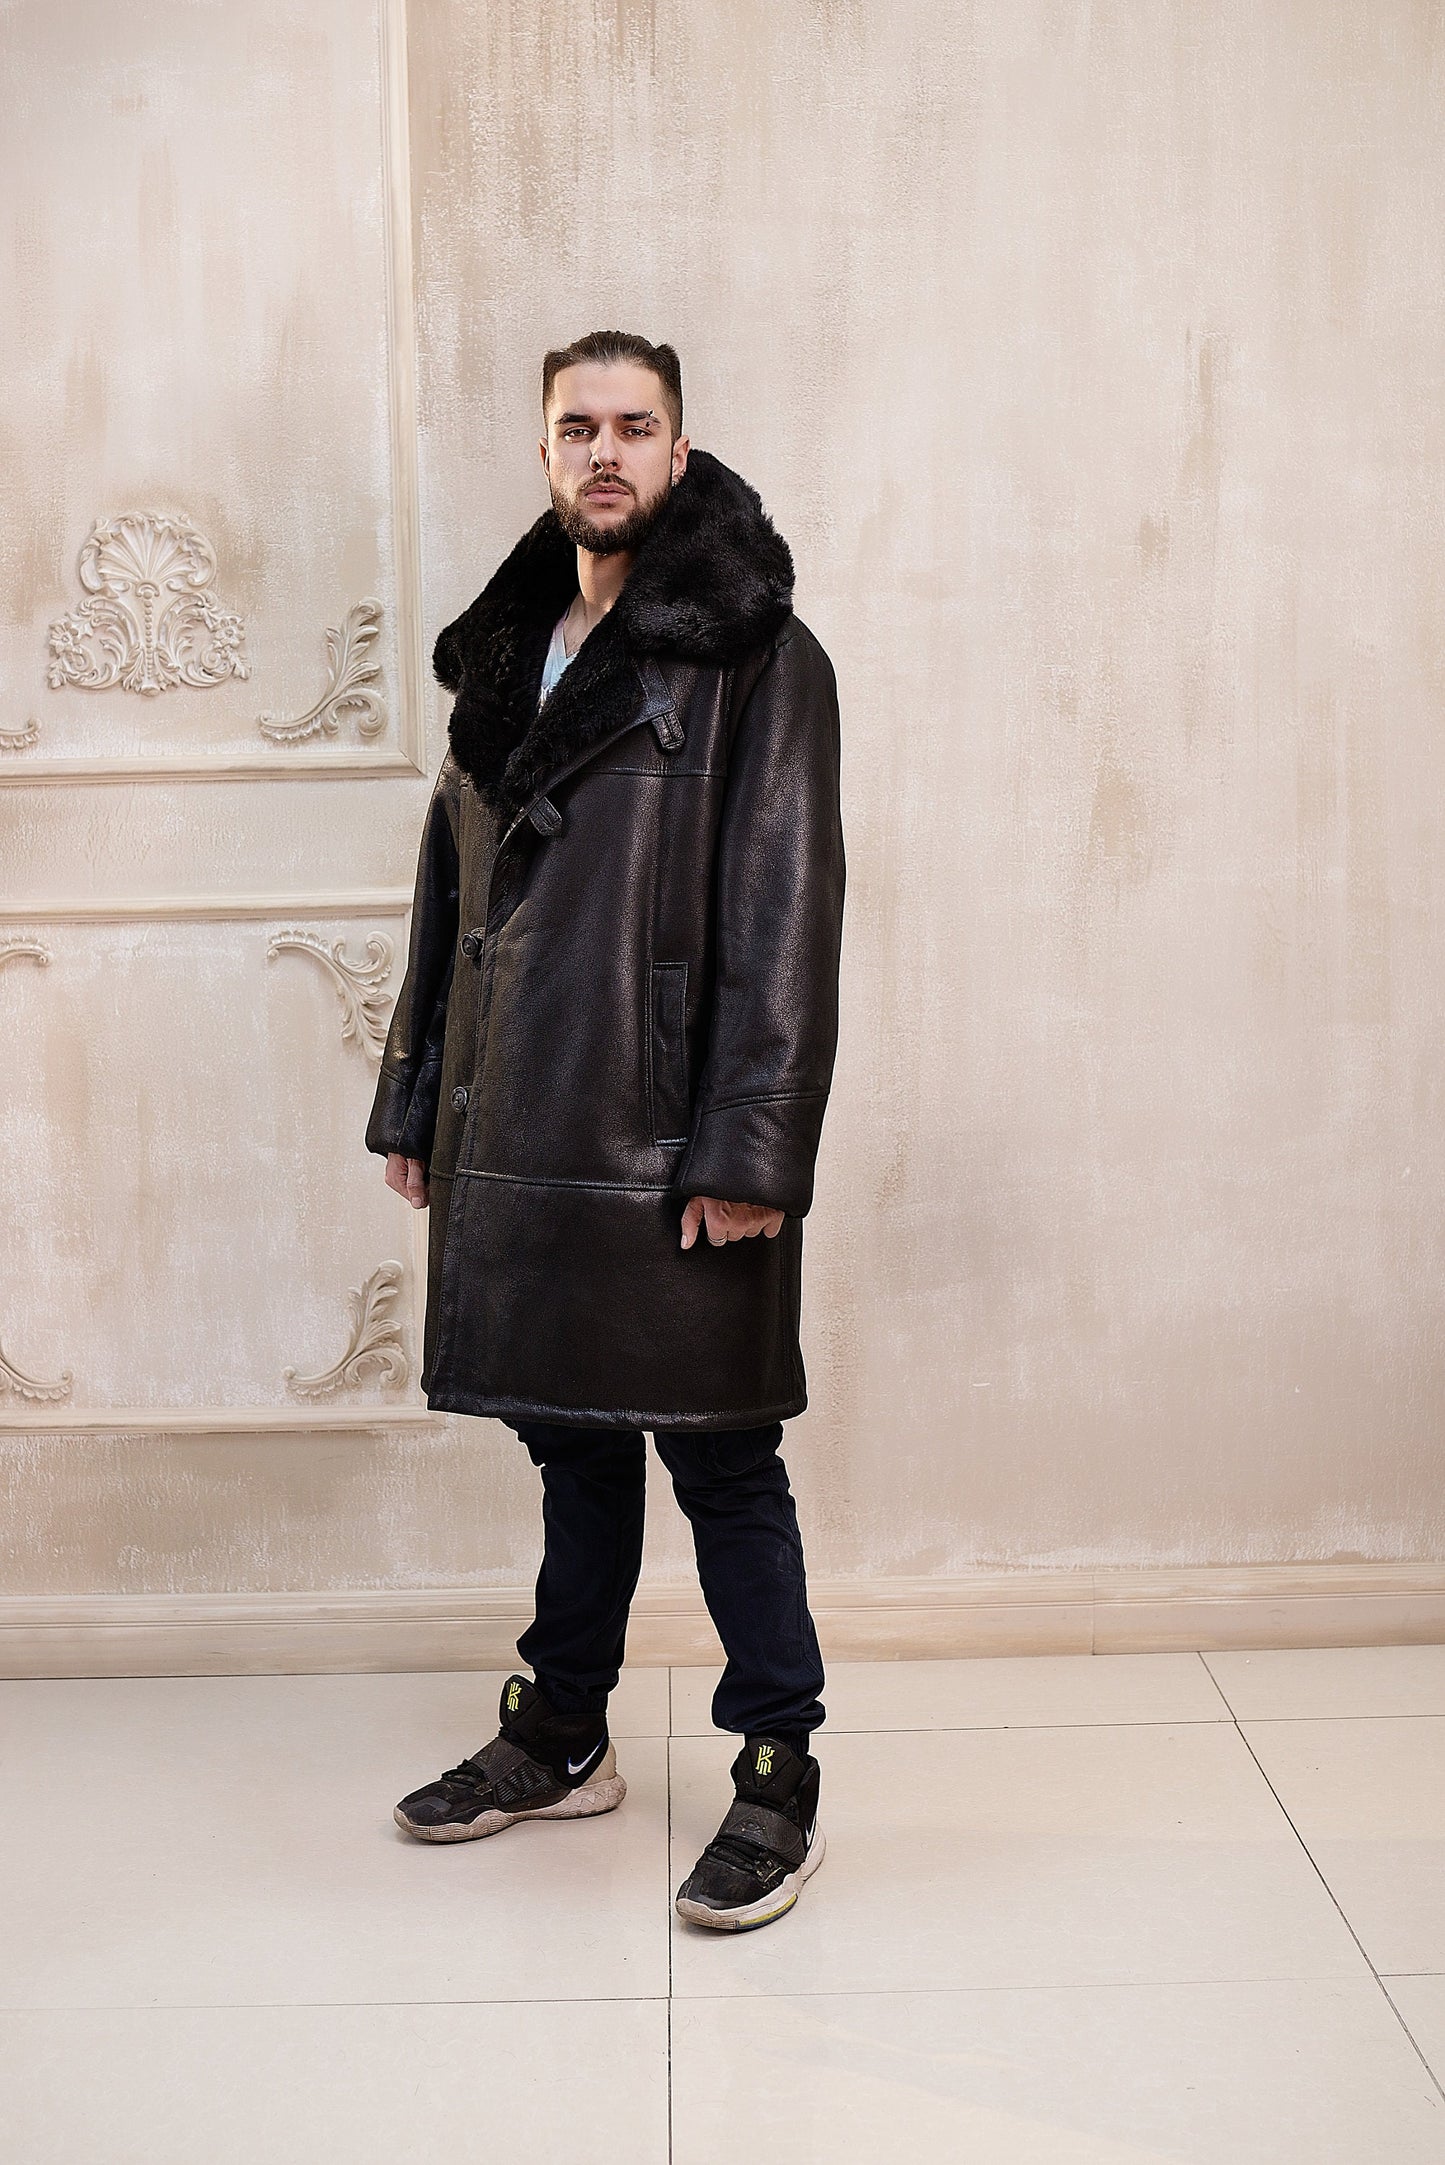 Mens Long Shearling Sheepskin Coat in Black Color with Wide Grey